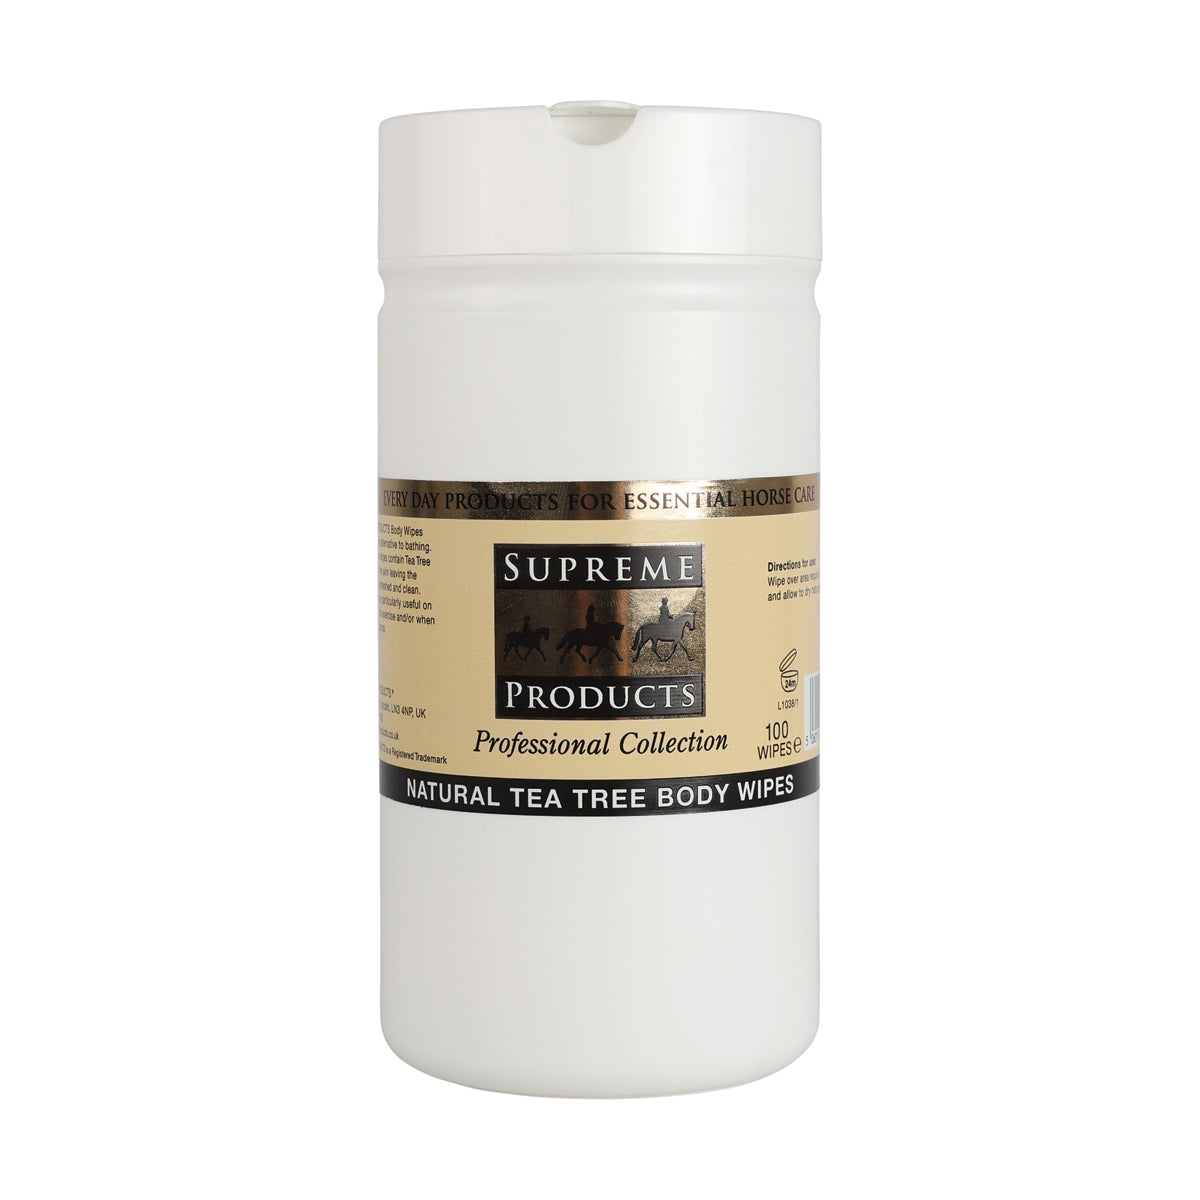 Supreme Products Natural Tea Tree Body Wipes Coat Shines Barnstaple Equestrian Supplies